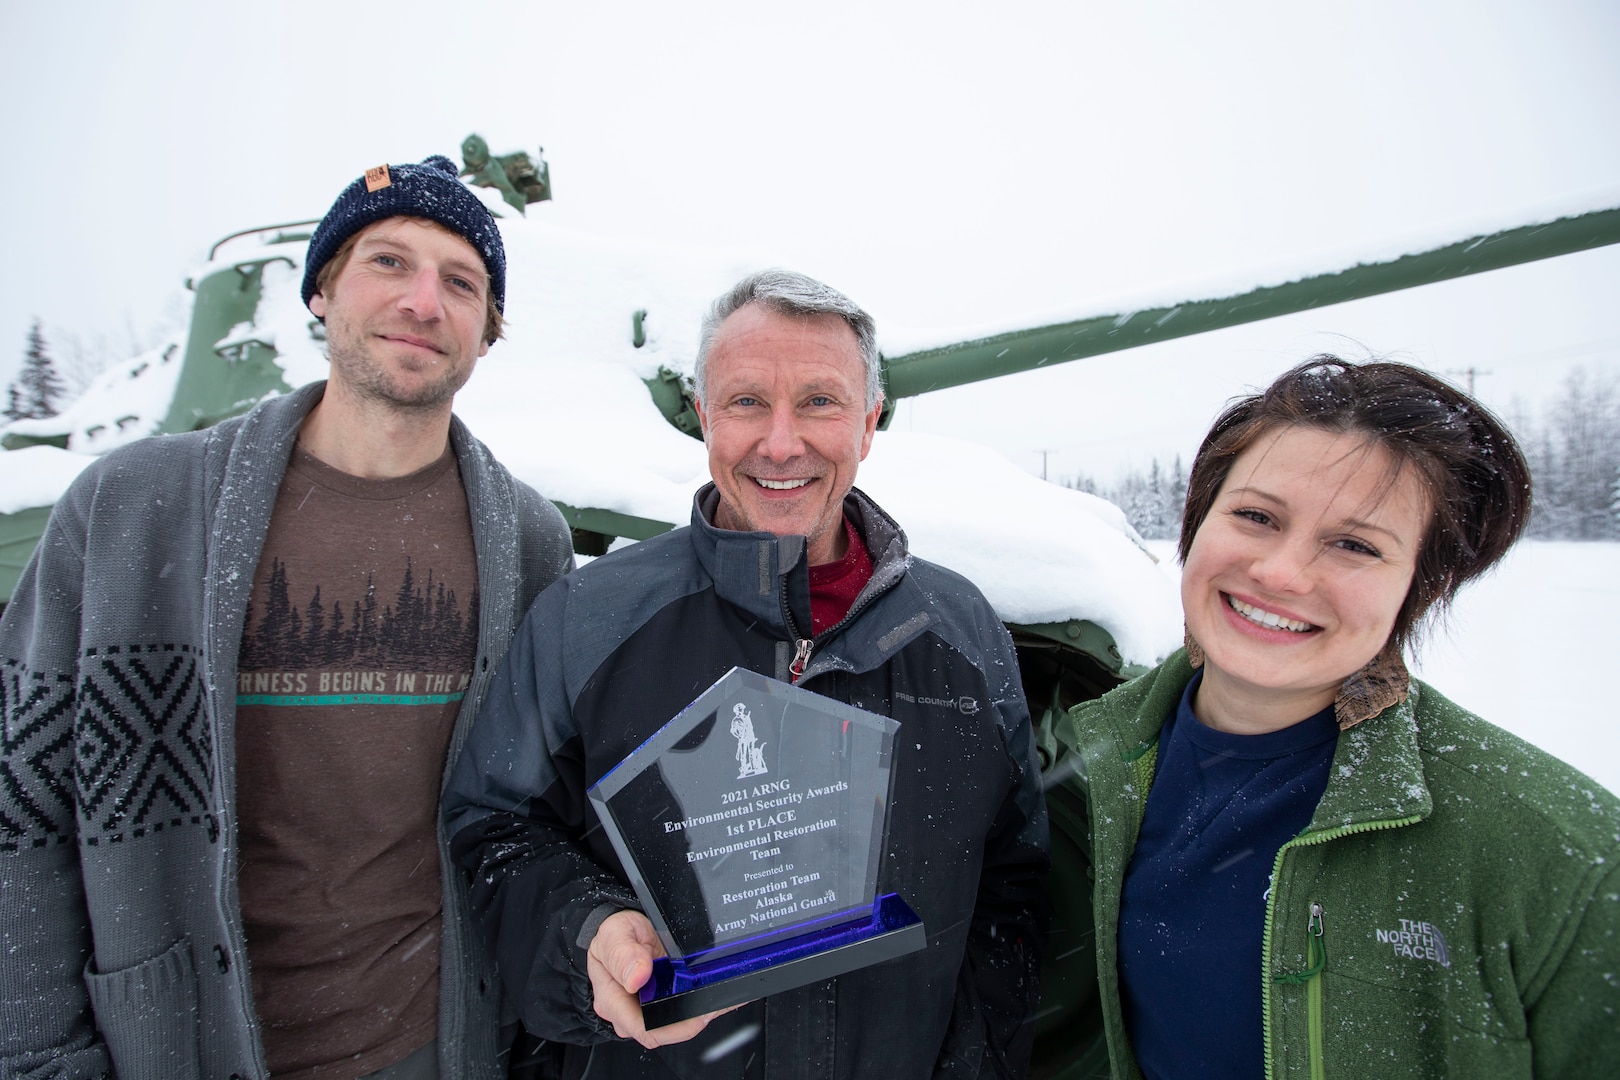 The Alaska Army National Guard's Restoration Team, Patrick Greary (left), Donald Flournoy, Alyssa Murphy and Aaron Acena (not pictured), received the Environmental Security Award from the National Guard Bureau for their accomplishments in environmental restoration for former AKNG properties. (U.S. Army National Guard photo by Victoria Granado)